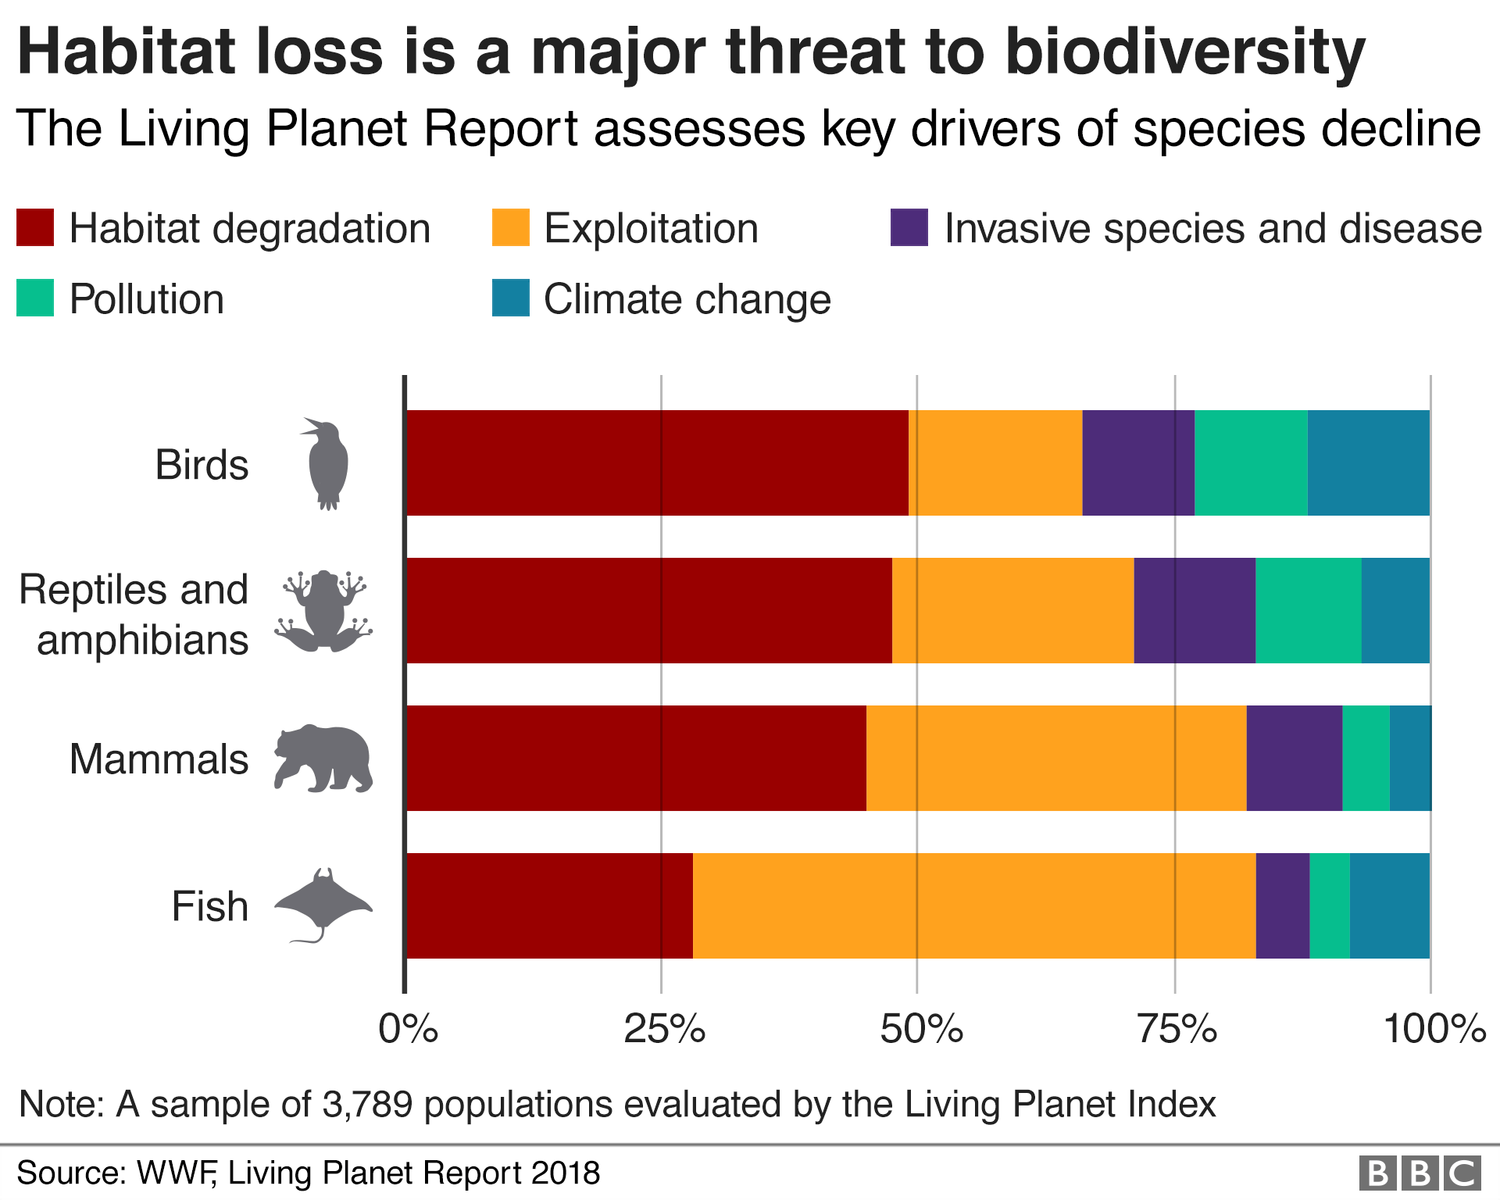 Nature's emergency: Where we are in five graphics - BBC News